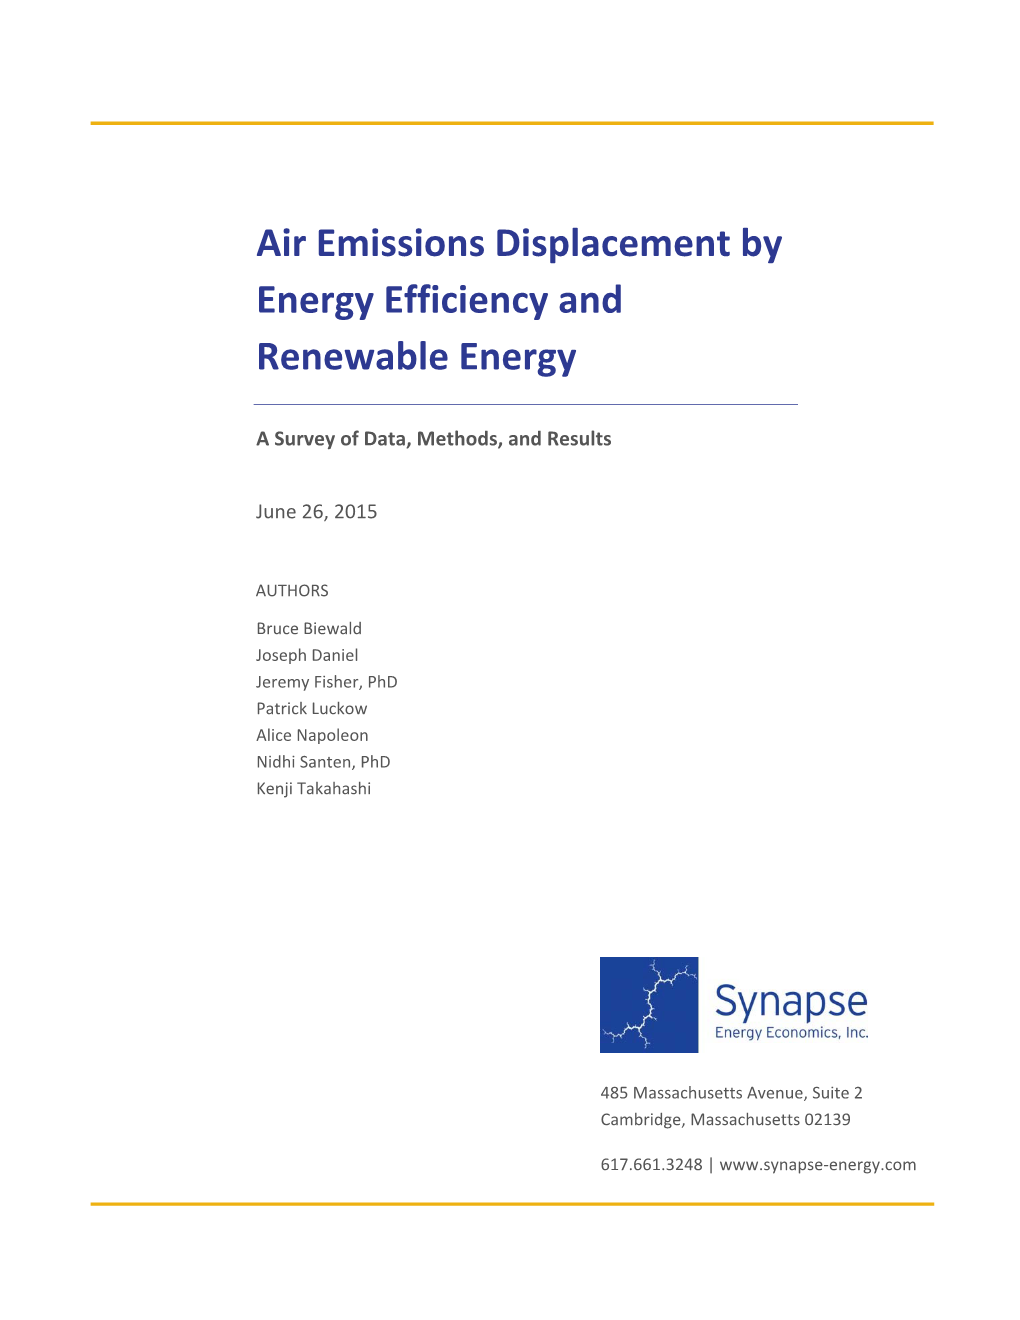 Air Emissions Displacement by Energy Efficiency and Renewable Energy